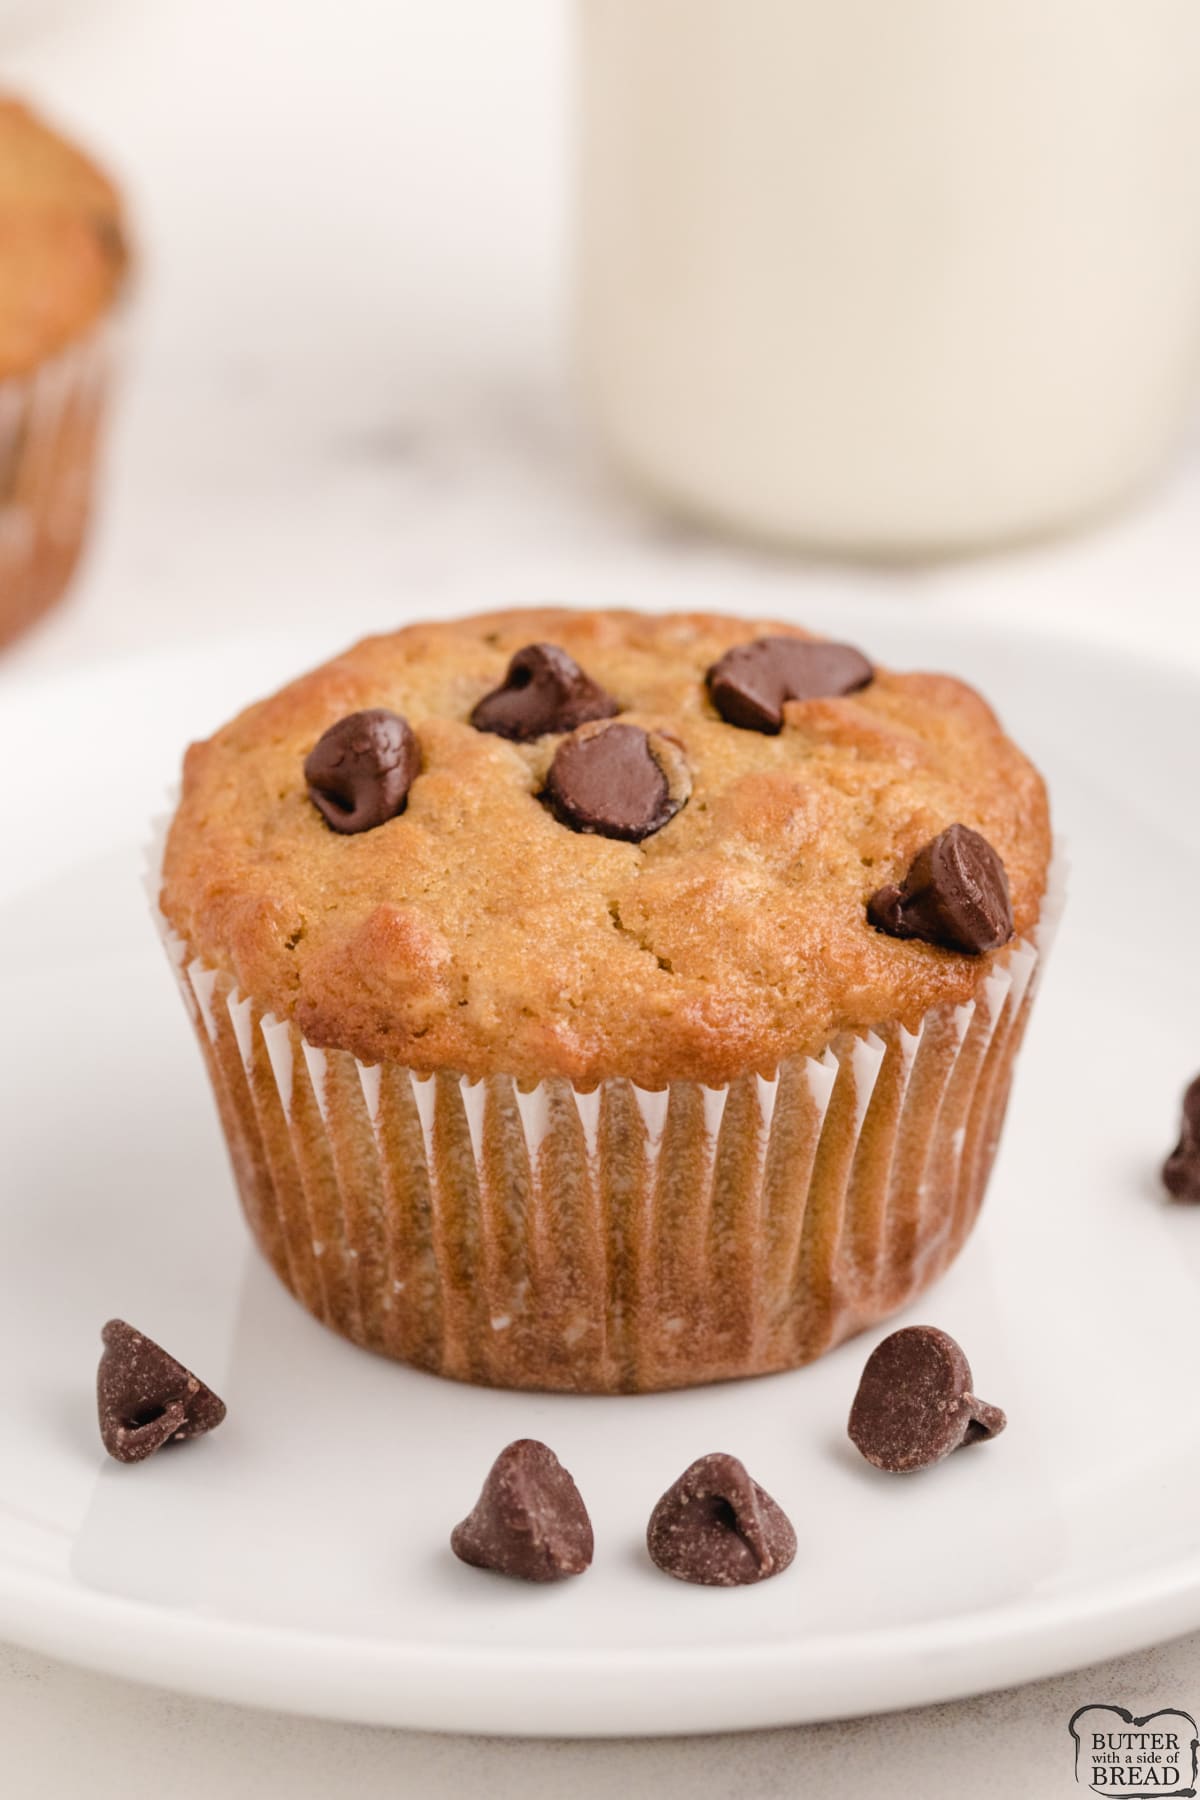 Oatmeal Chocolate Chip Muffins made with oats, buttermilk and lots of chocolate chips! Deliciously soft muffin recipe made completely from scratch.